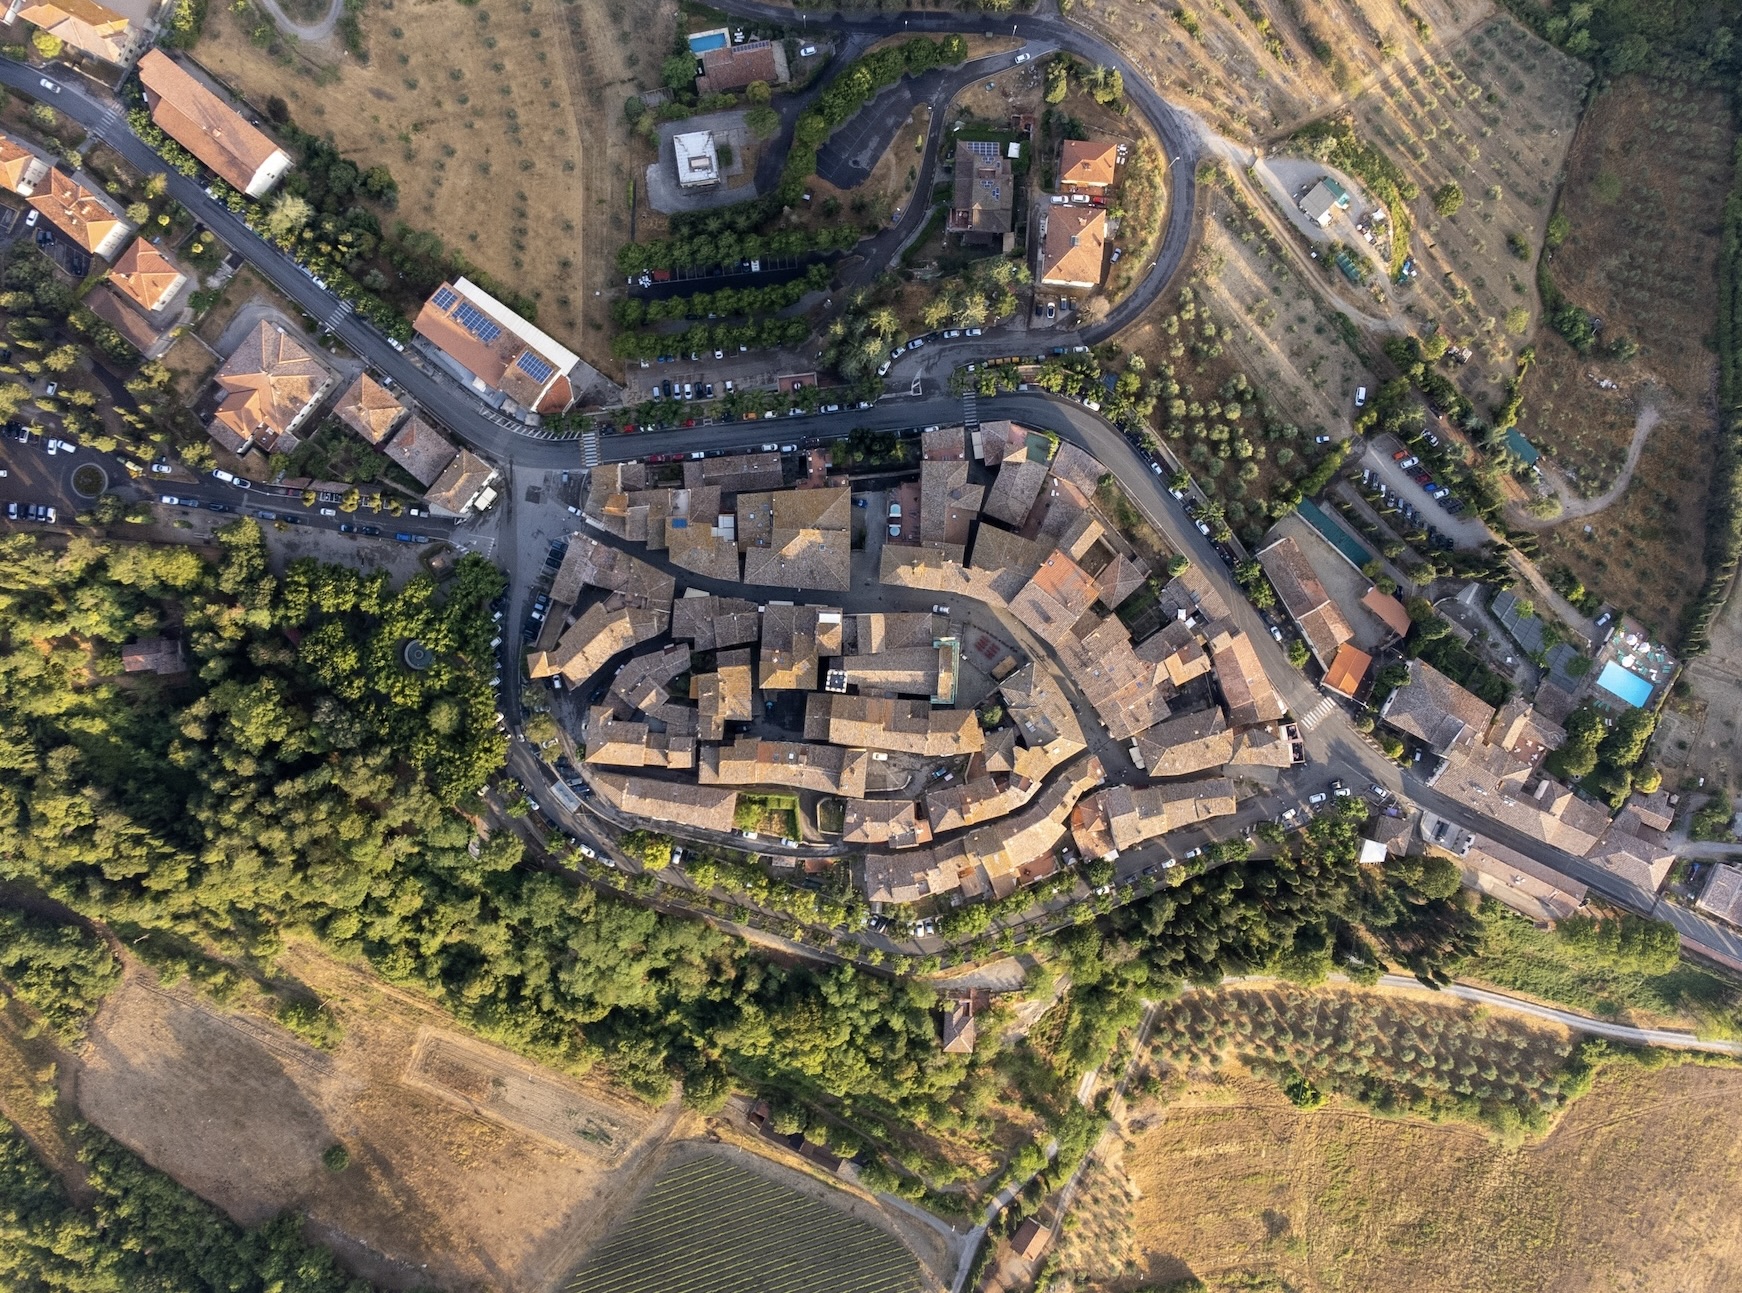 Saturnia is a populated yet quaint location in Italy. it is also home to an ancient hot spring. 
pictured: an overhead look at the village of Saturnia, Italy 